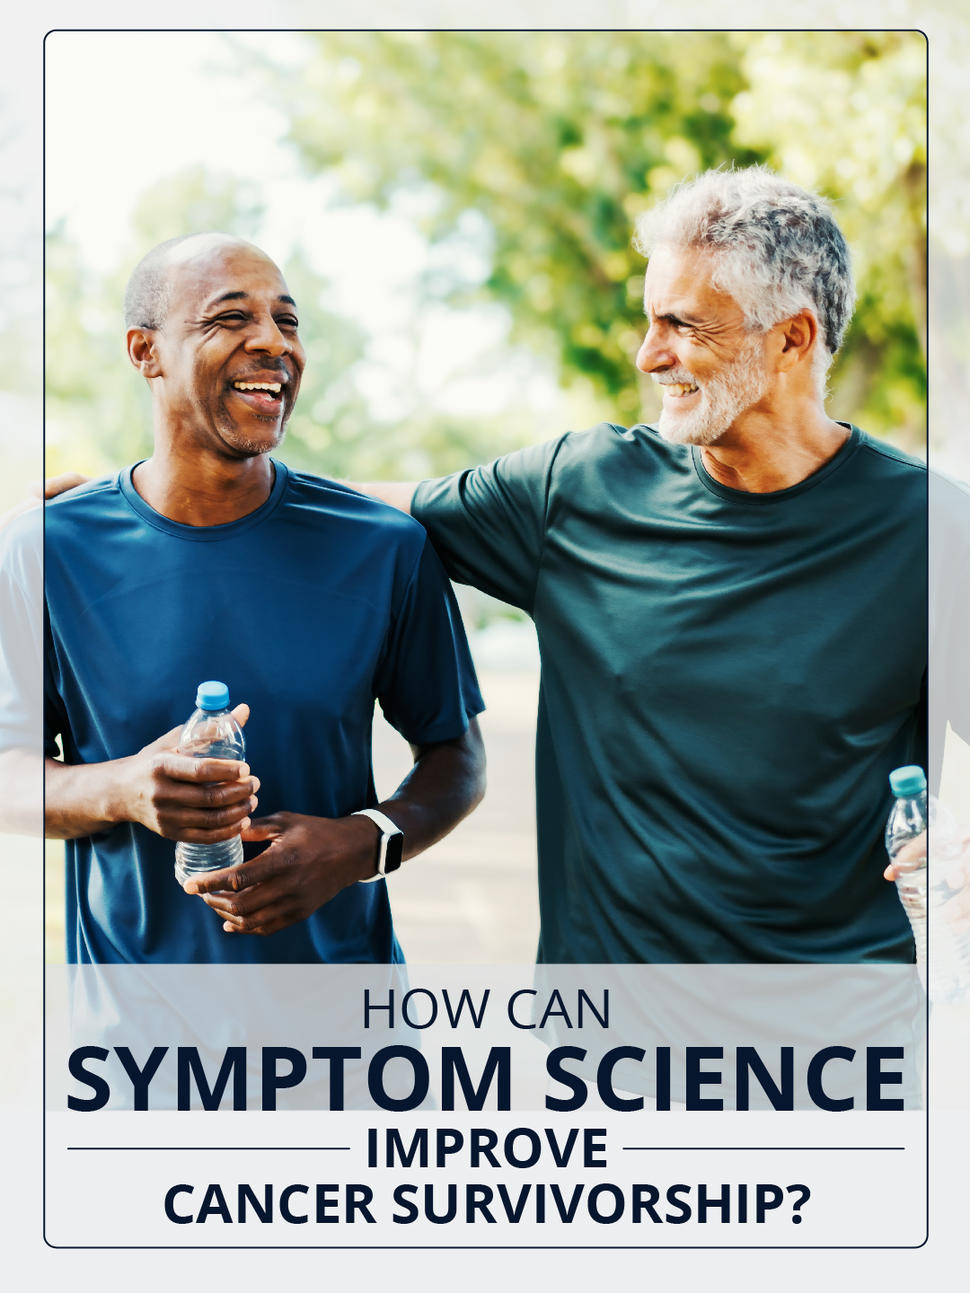 Two older men in workout clothes are outside talking with each other and smiling.